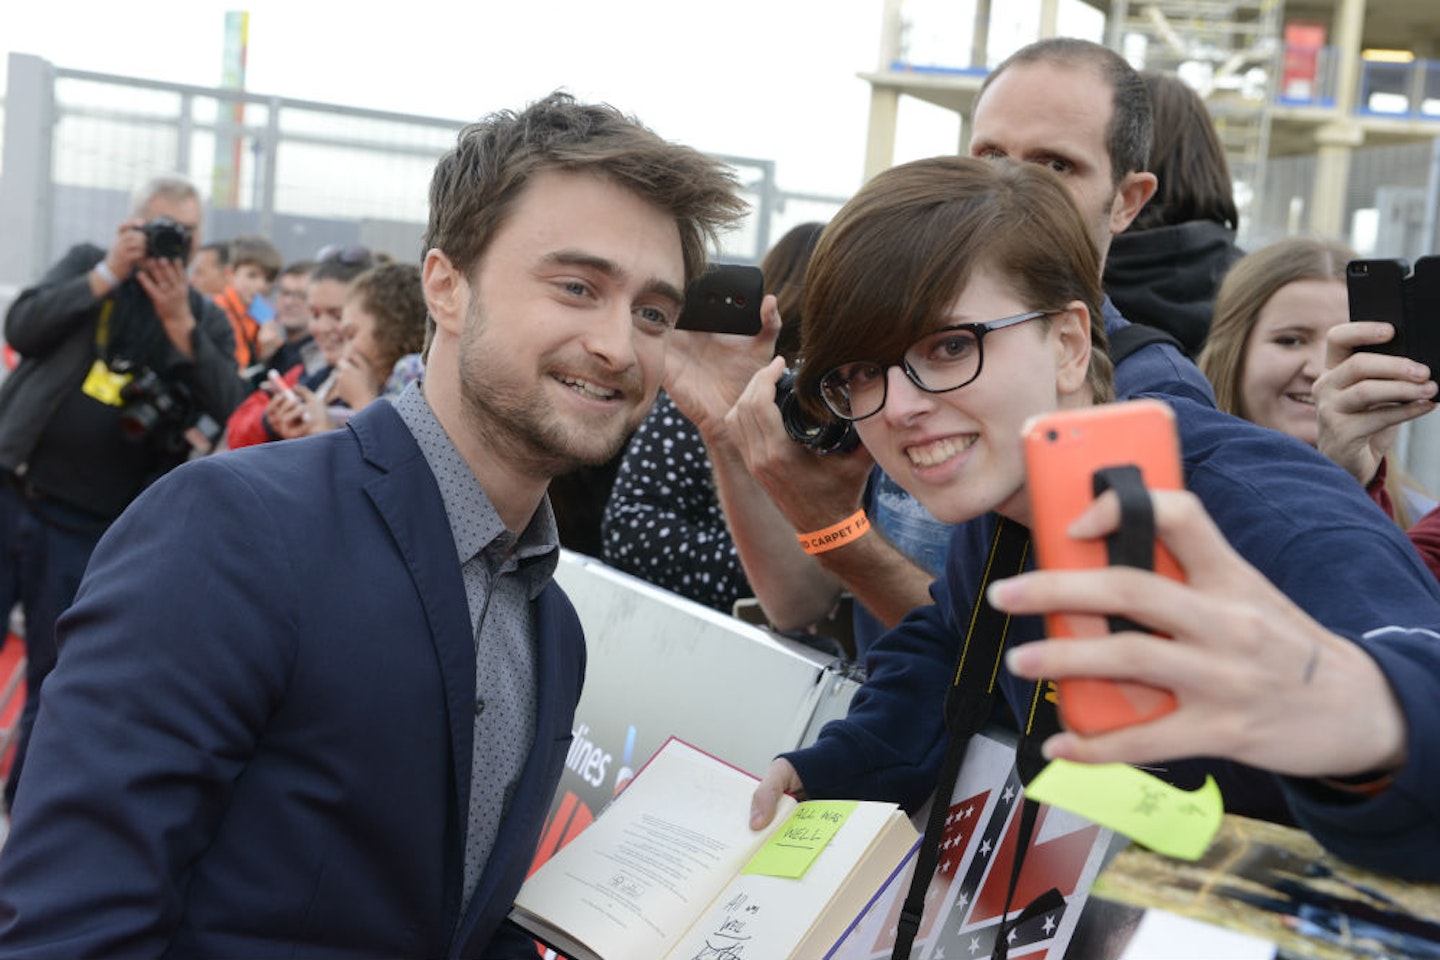 Daniel Radcliffe with a fan at Empire Live